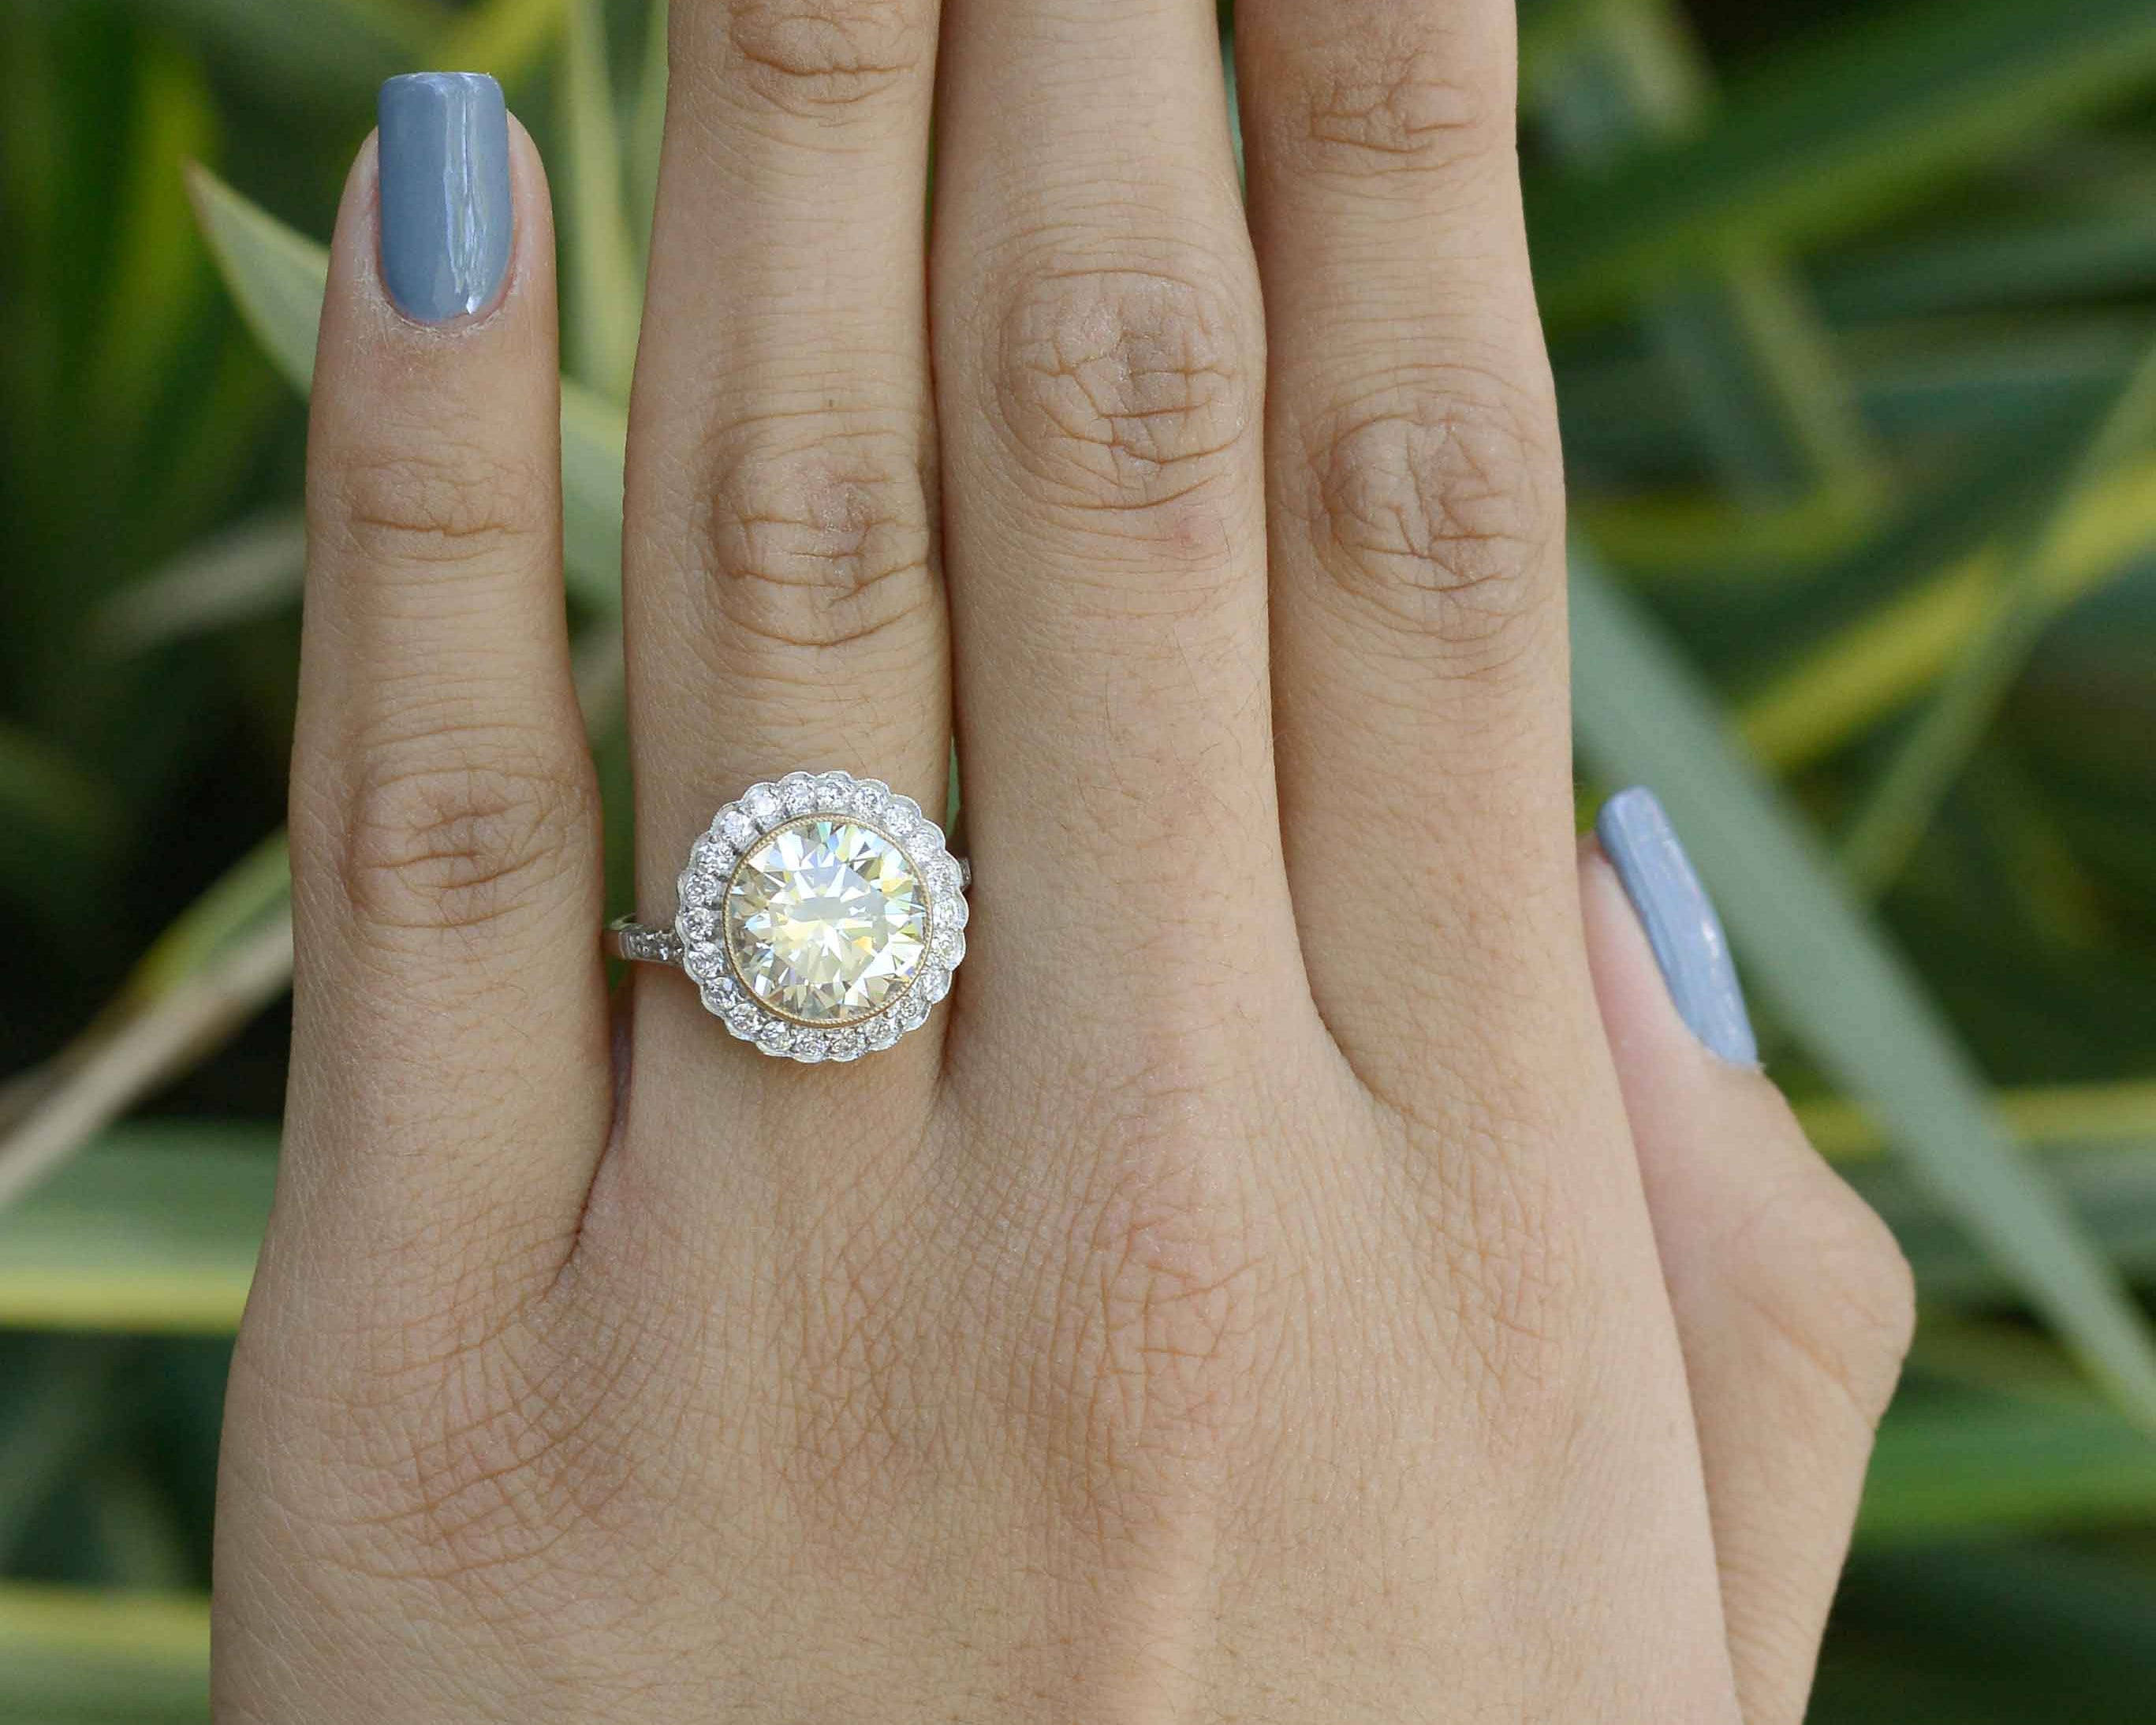 A huge diamond solitaire surrounded by a scalloped halo.